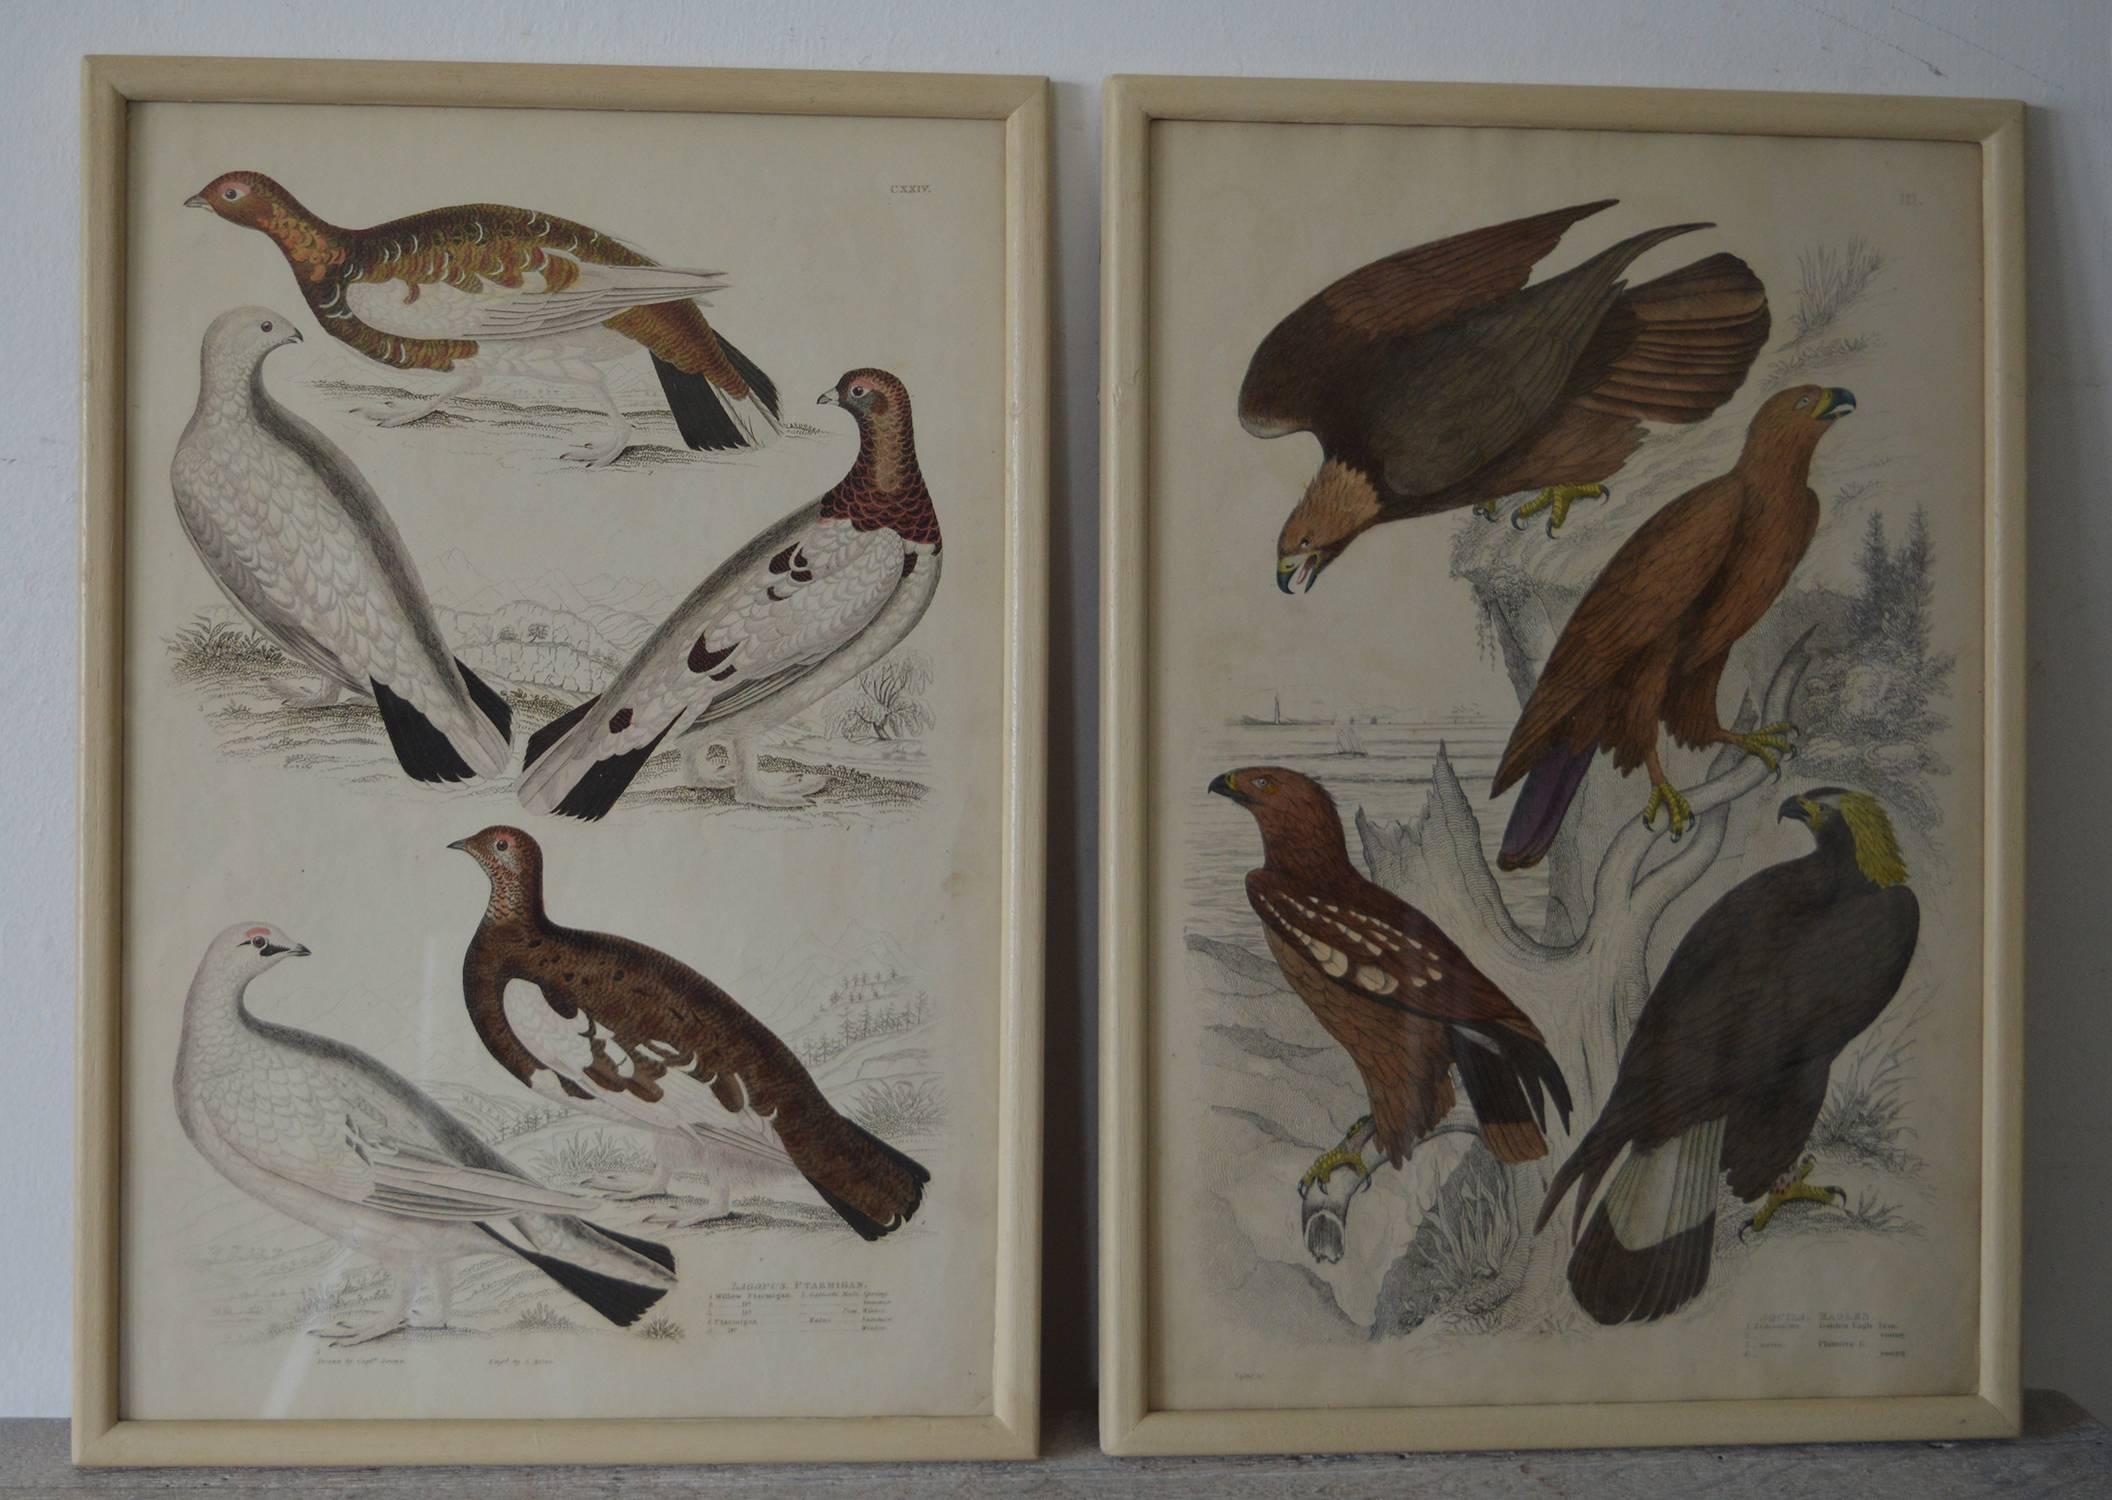 Mid-19th Century Set of 18 ( 12 + 6 ) Antique Bird Prints in Faux Ivory Frames, 1830s